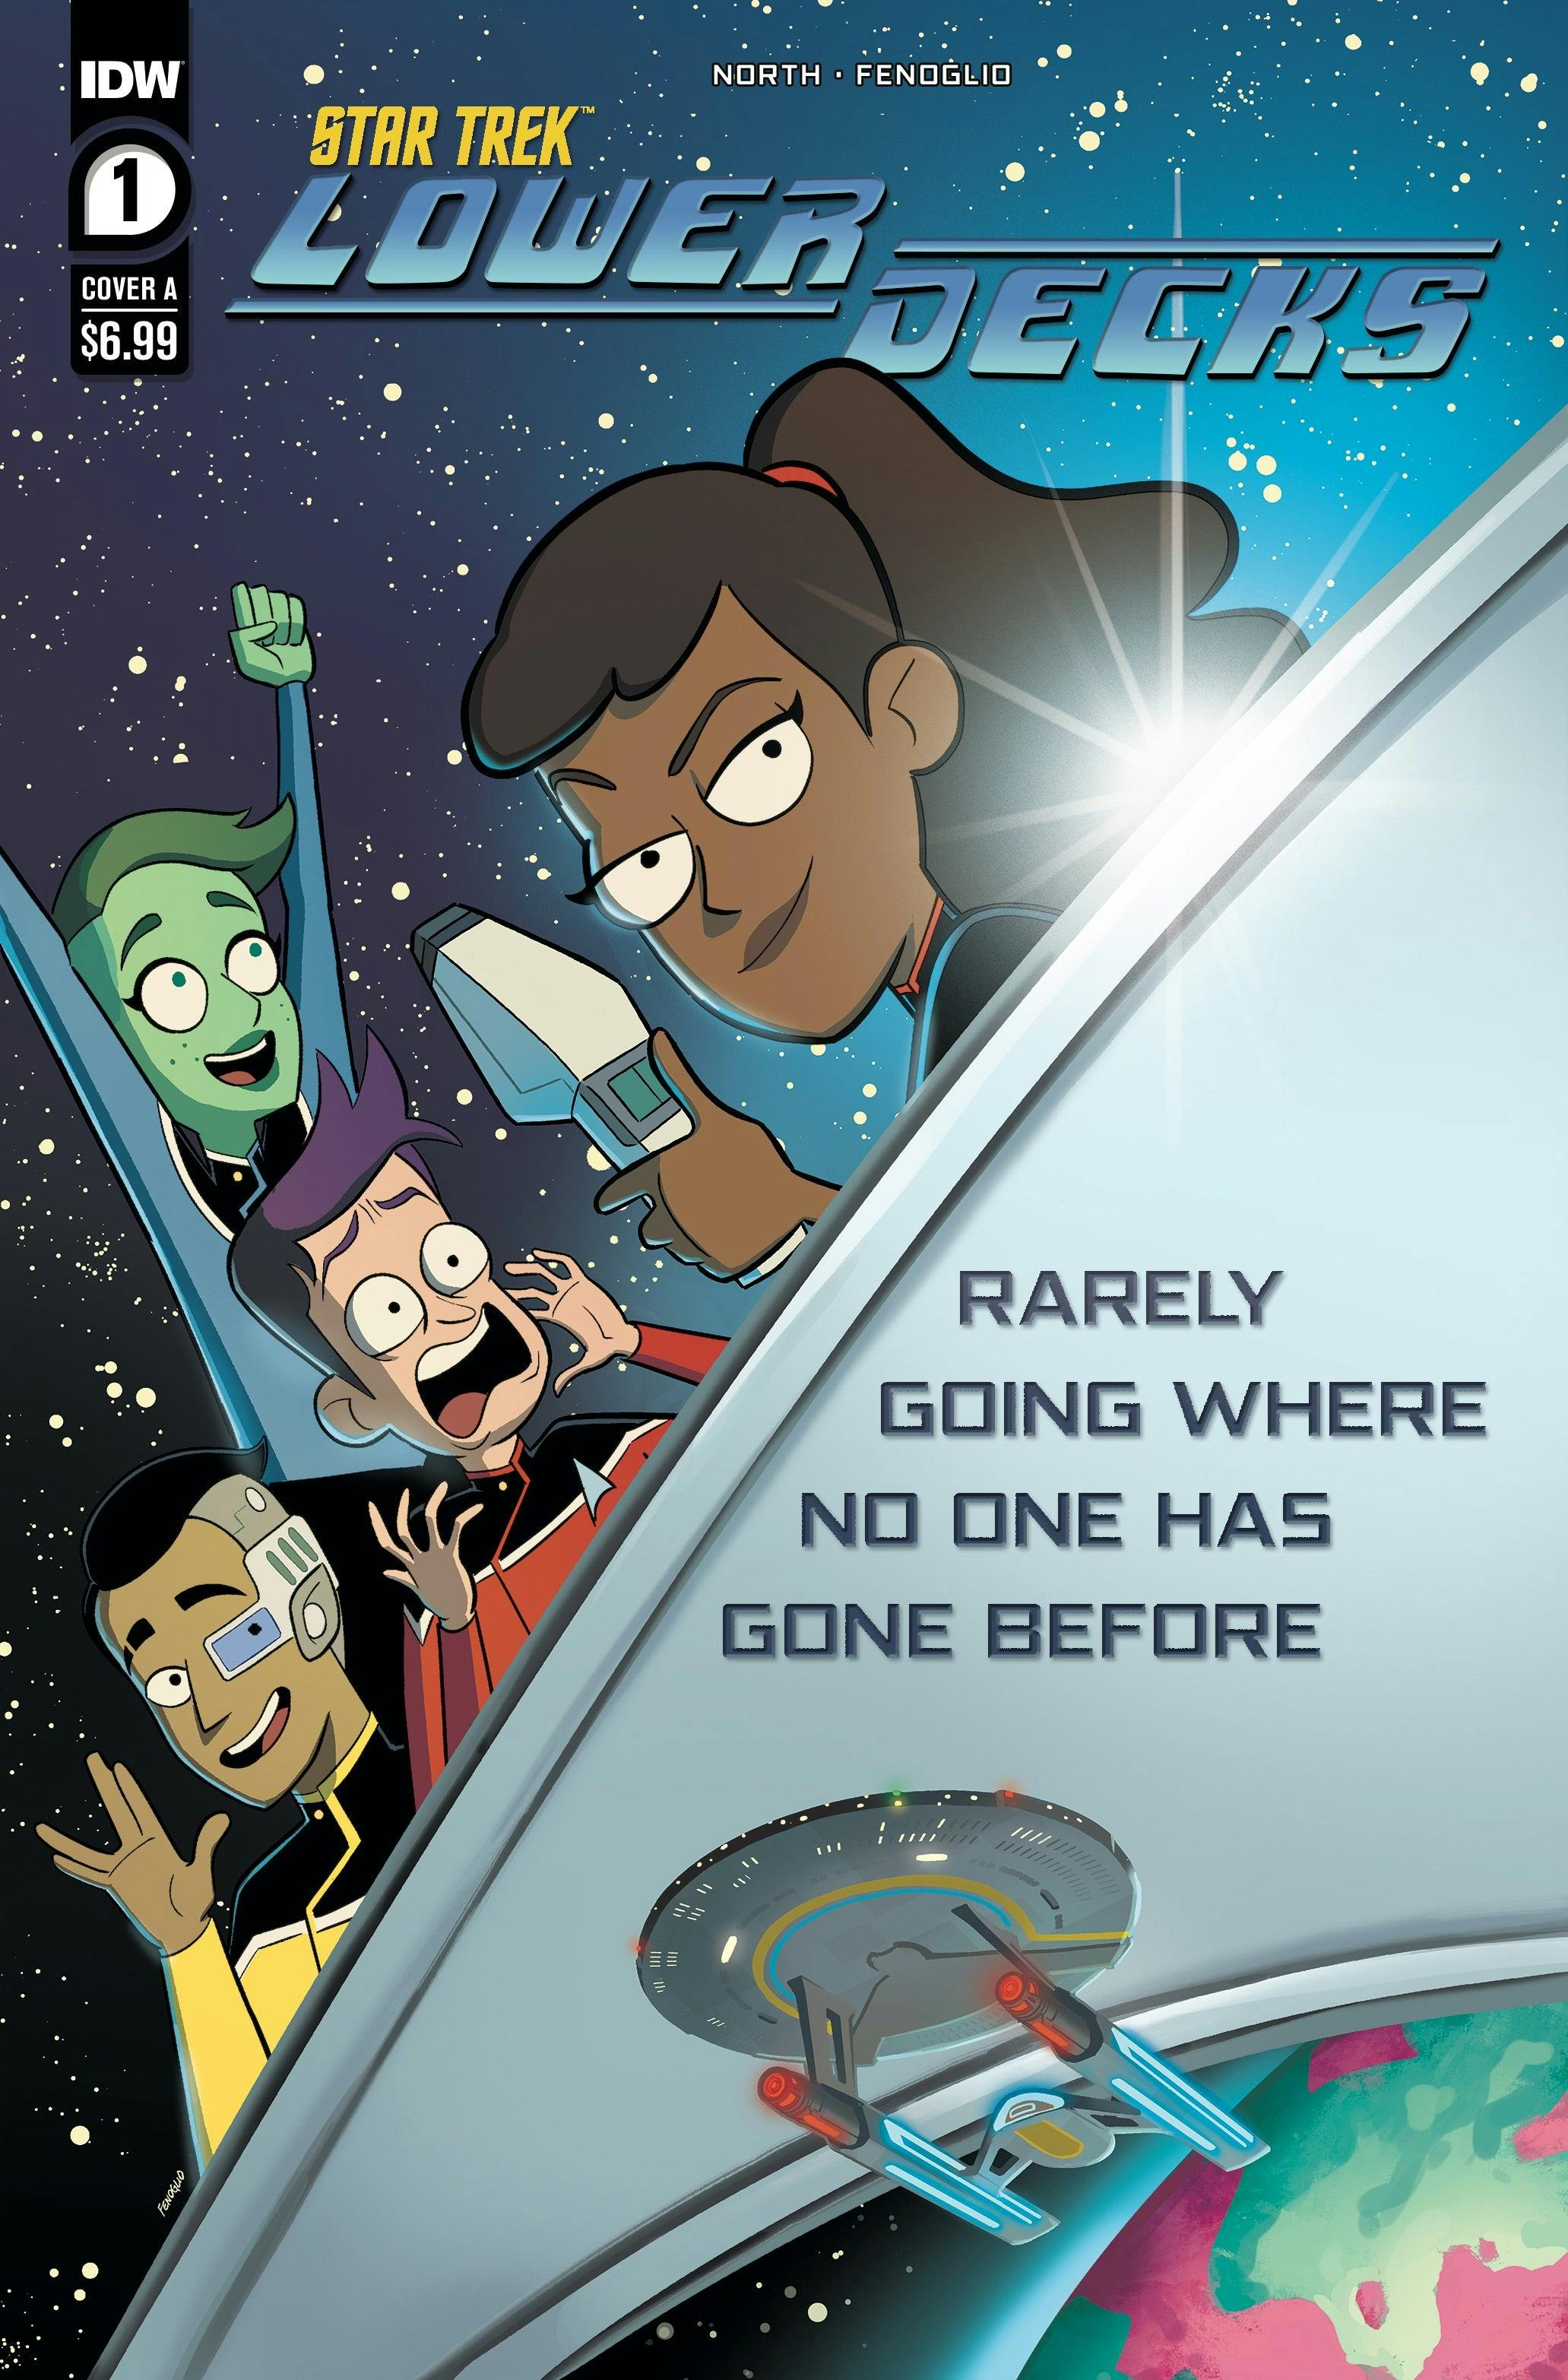 The cover of Star Trek: Lower Decks #1 from IDW.